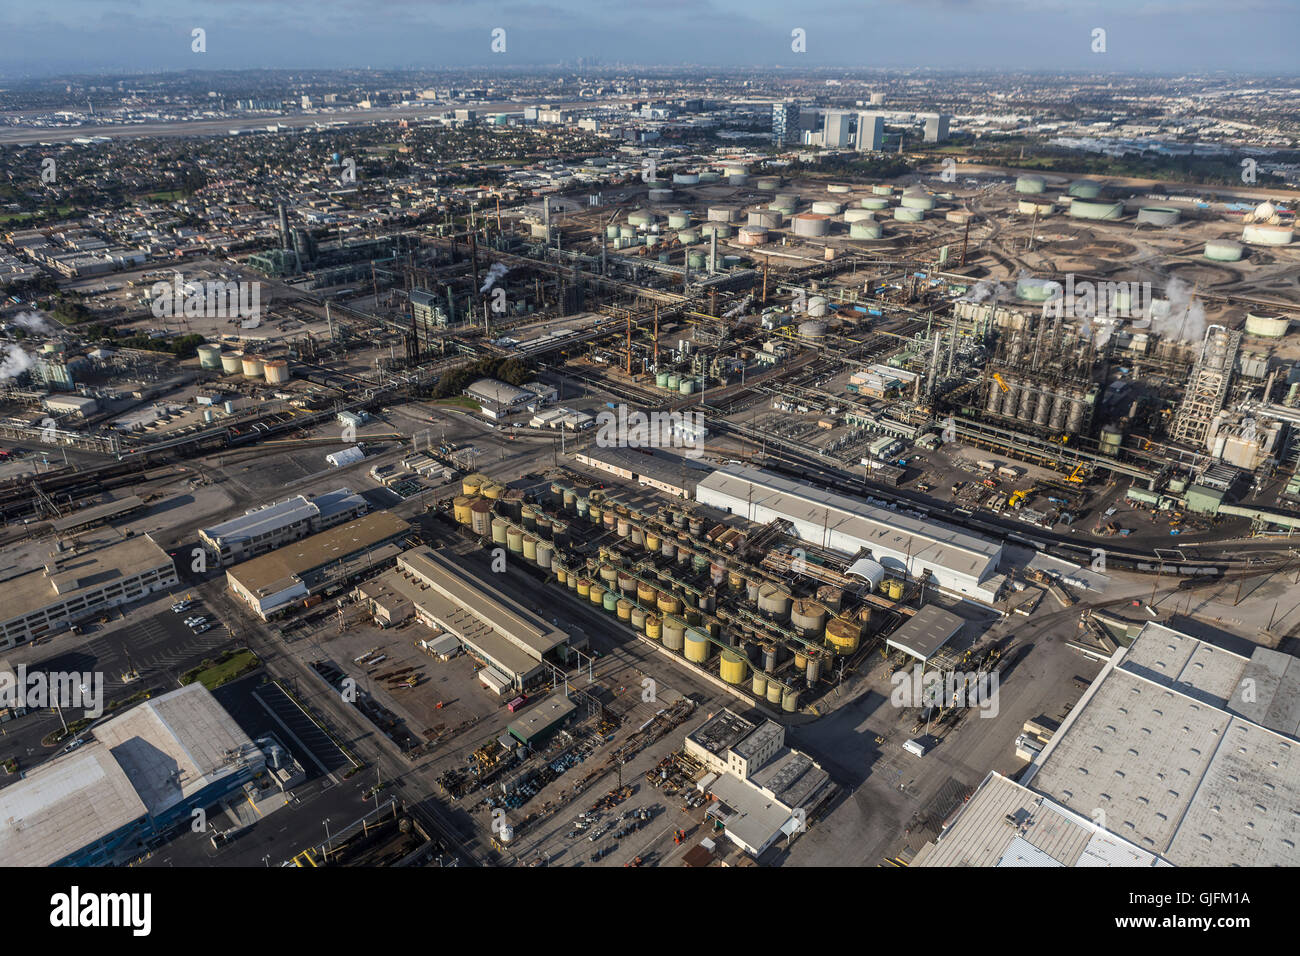 El Segundo, California, USA - August 6, 2016:  Aerial view of large oil refinery near Los Angeles in Southern California. Stock Photo